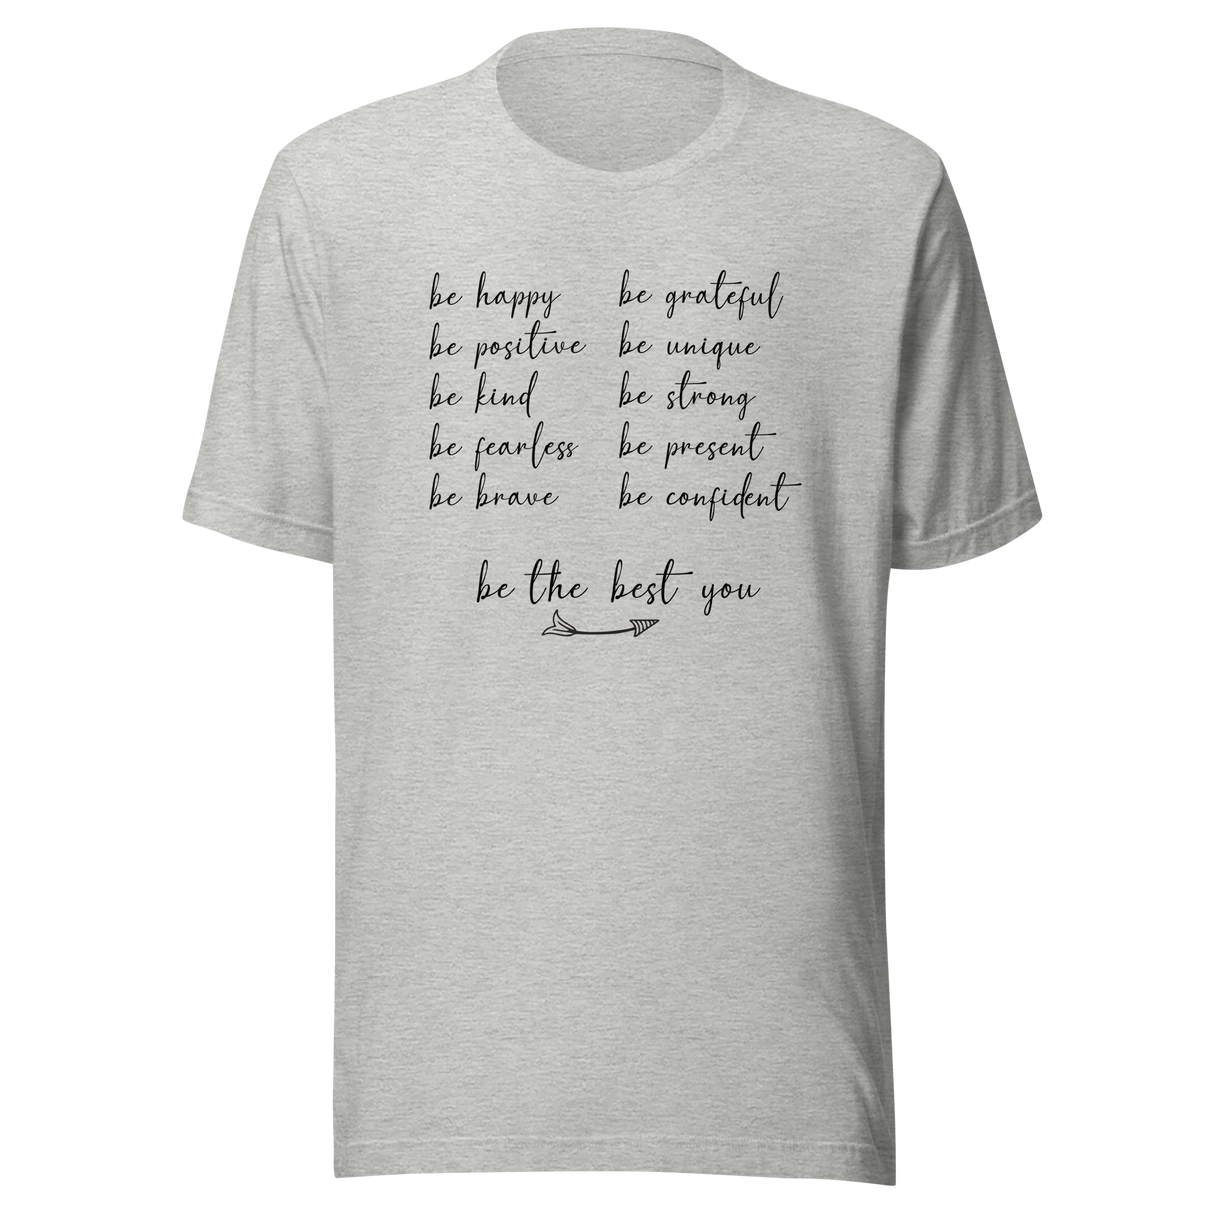 be-happy-be-positive-be-kind-be-fearless-be-brave-be-grateful-be-unique-be-strong-be-present-be-confident-happy-tee-positive-t-shirt-fearless-tee-t-shirt-tee#color_athletic-heather